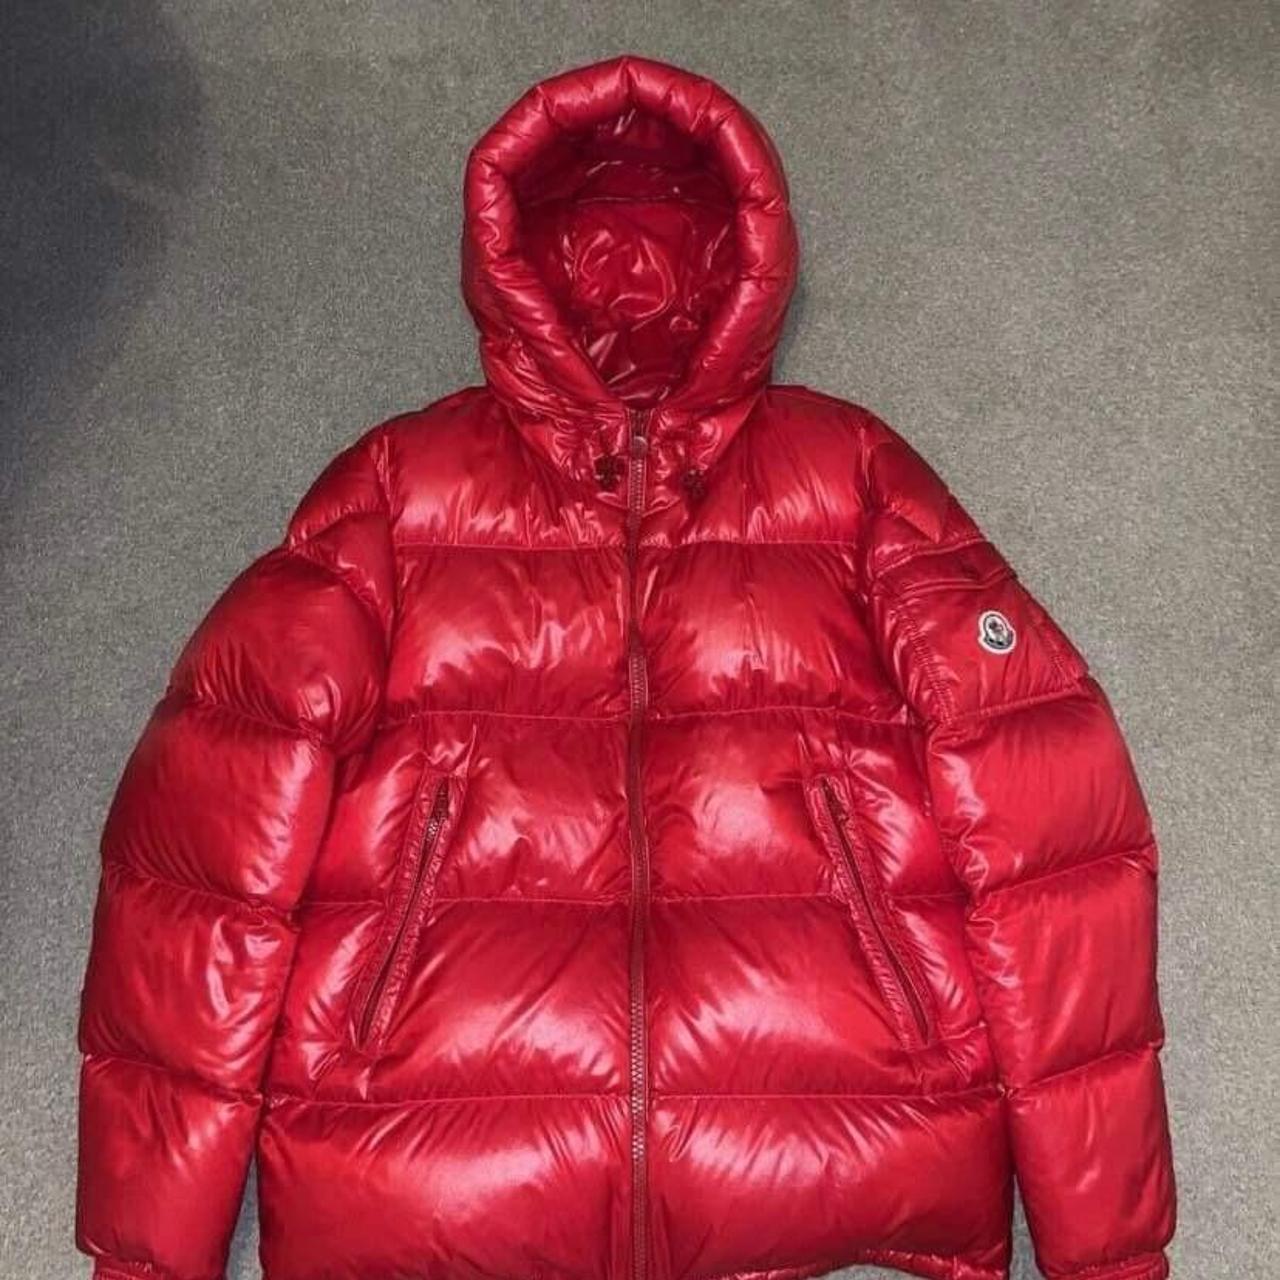 Moncler Puffer Jacket contact me for purchase before... - Depop